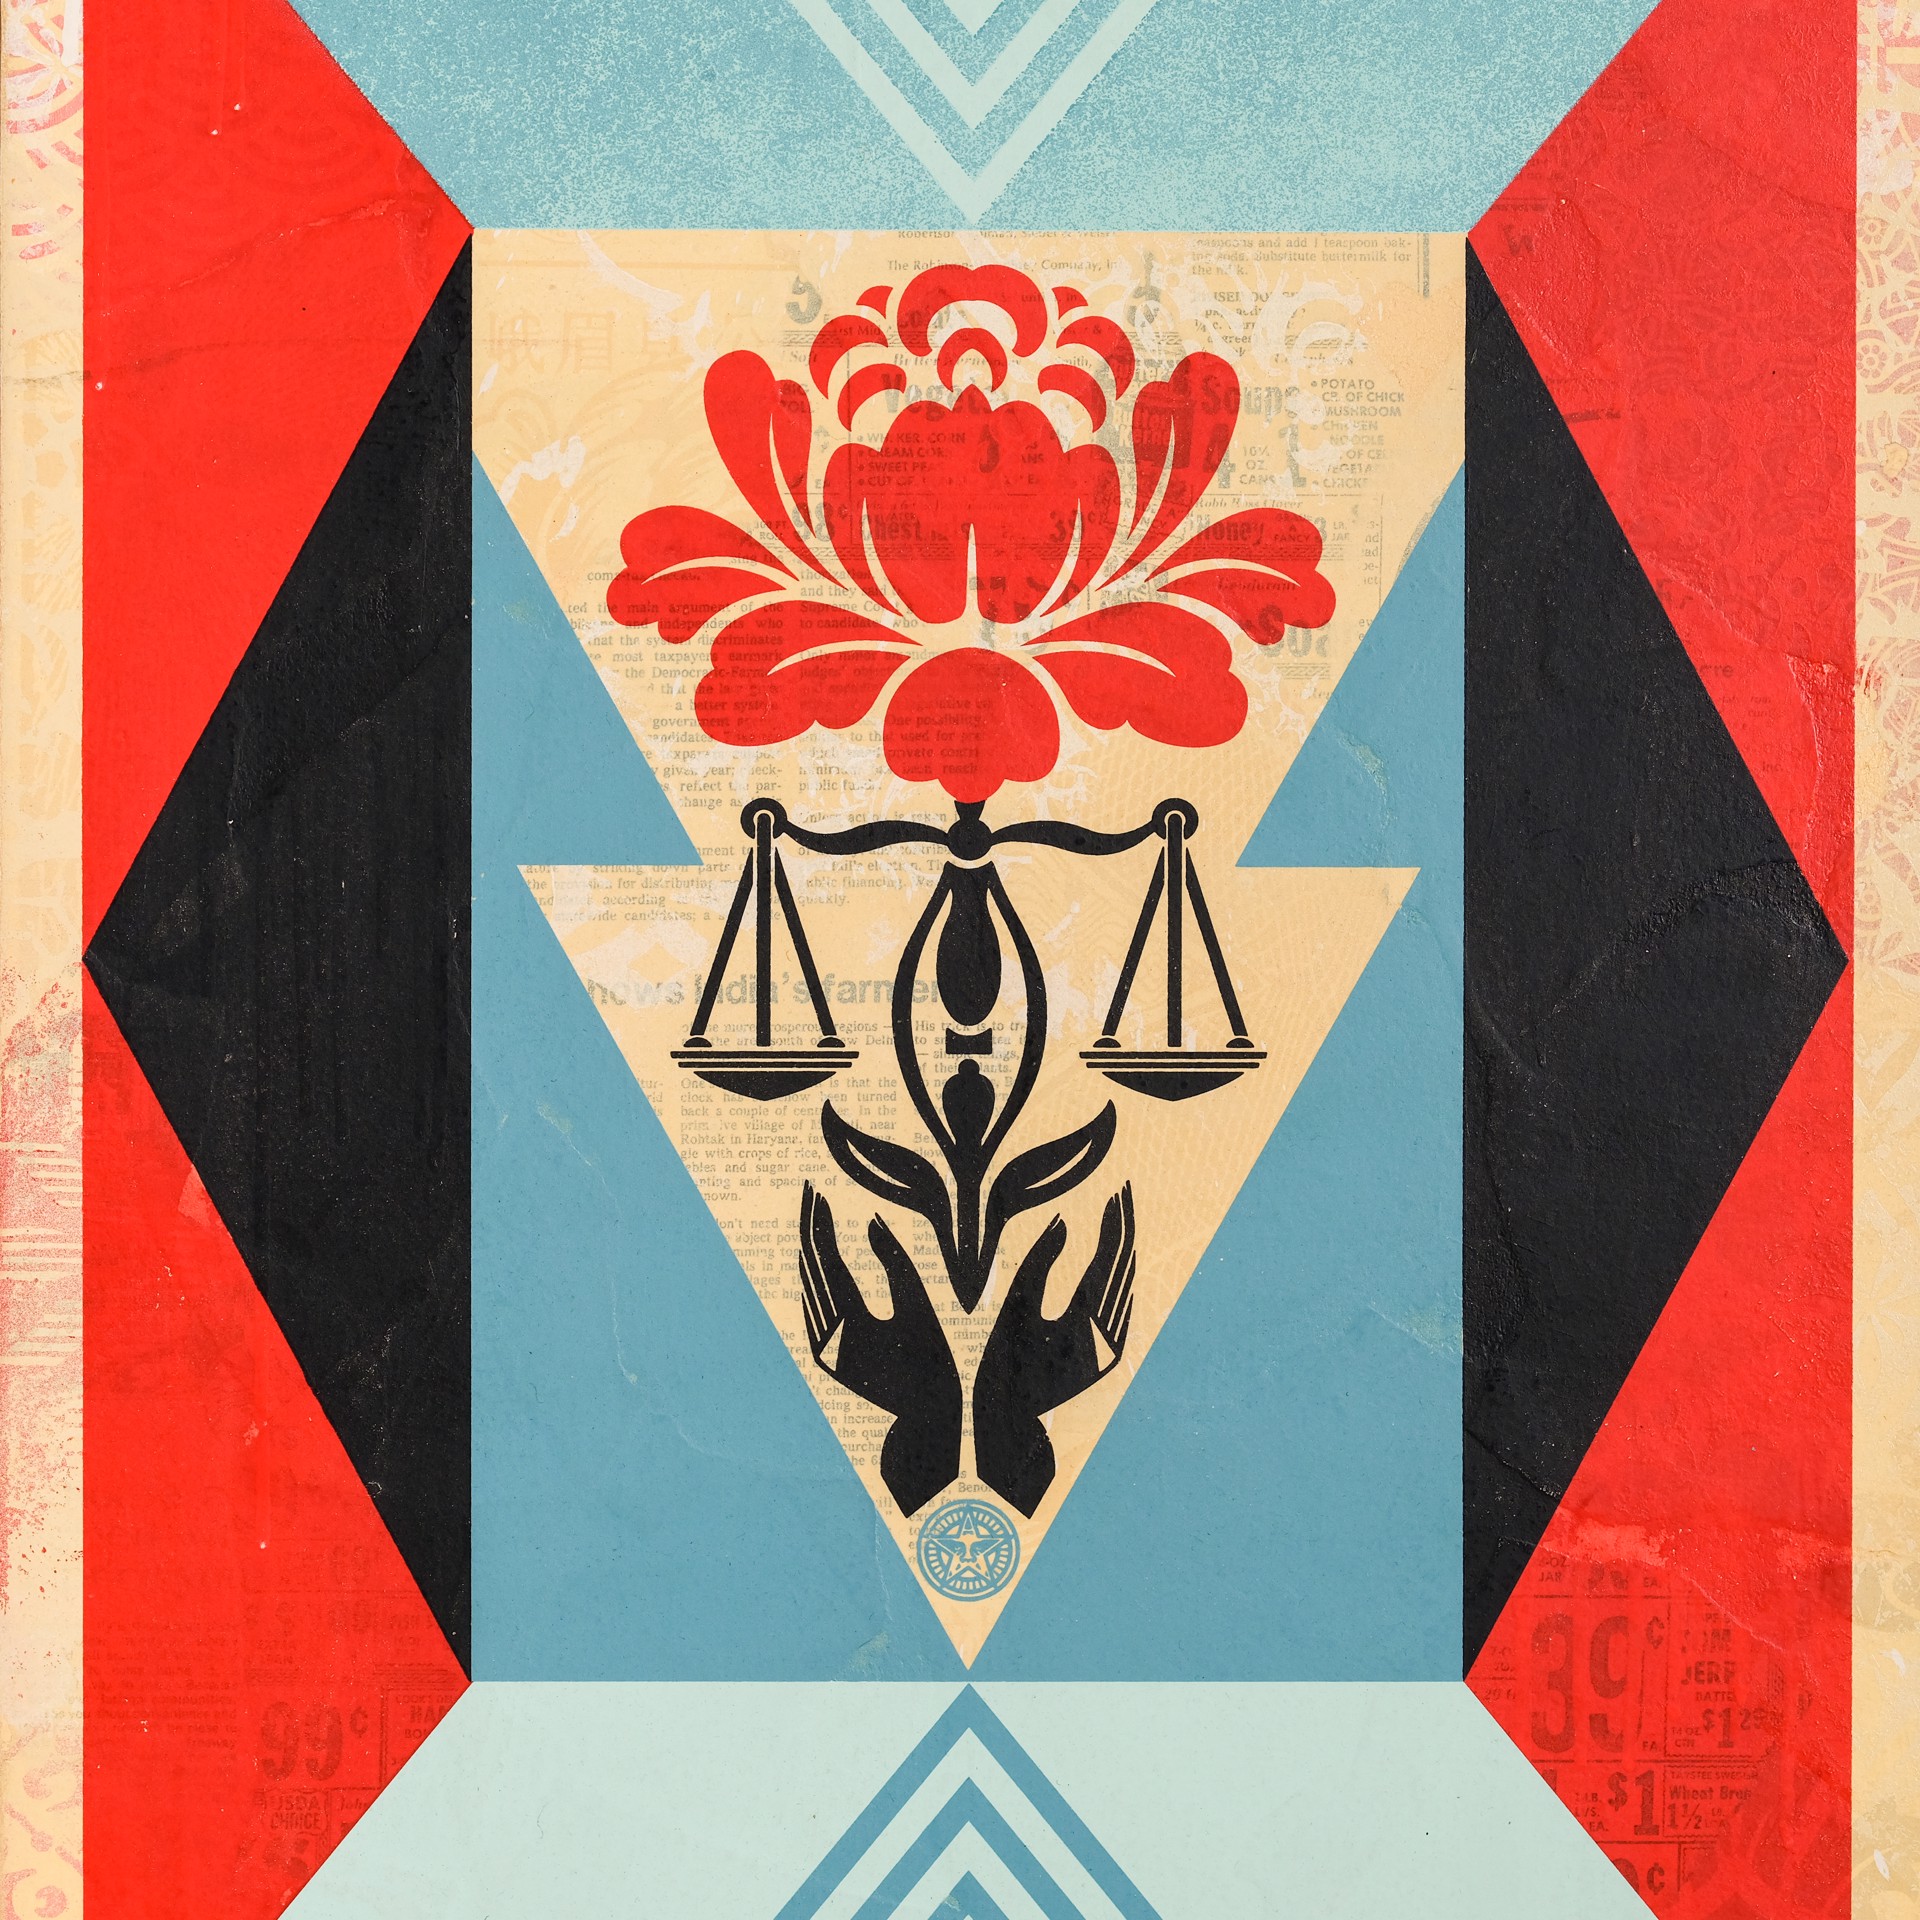 Cultivate Justice (Blue) by Shepard Fairey / Limited editions